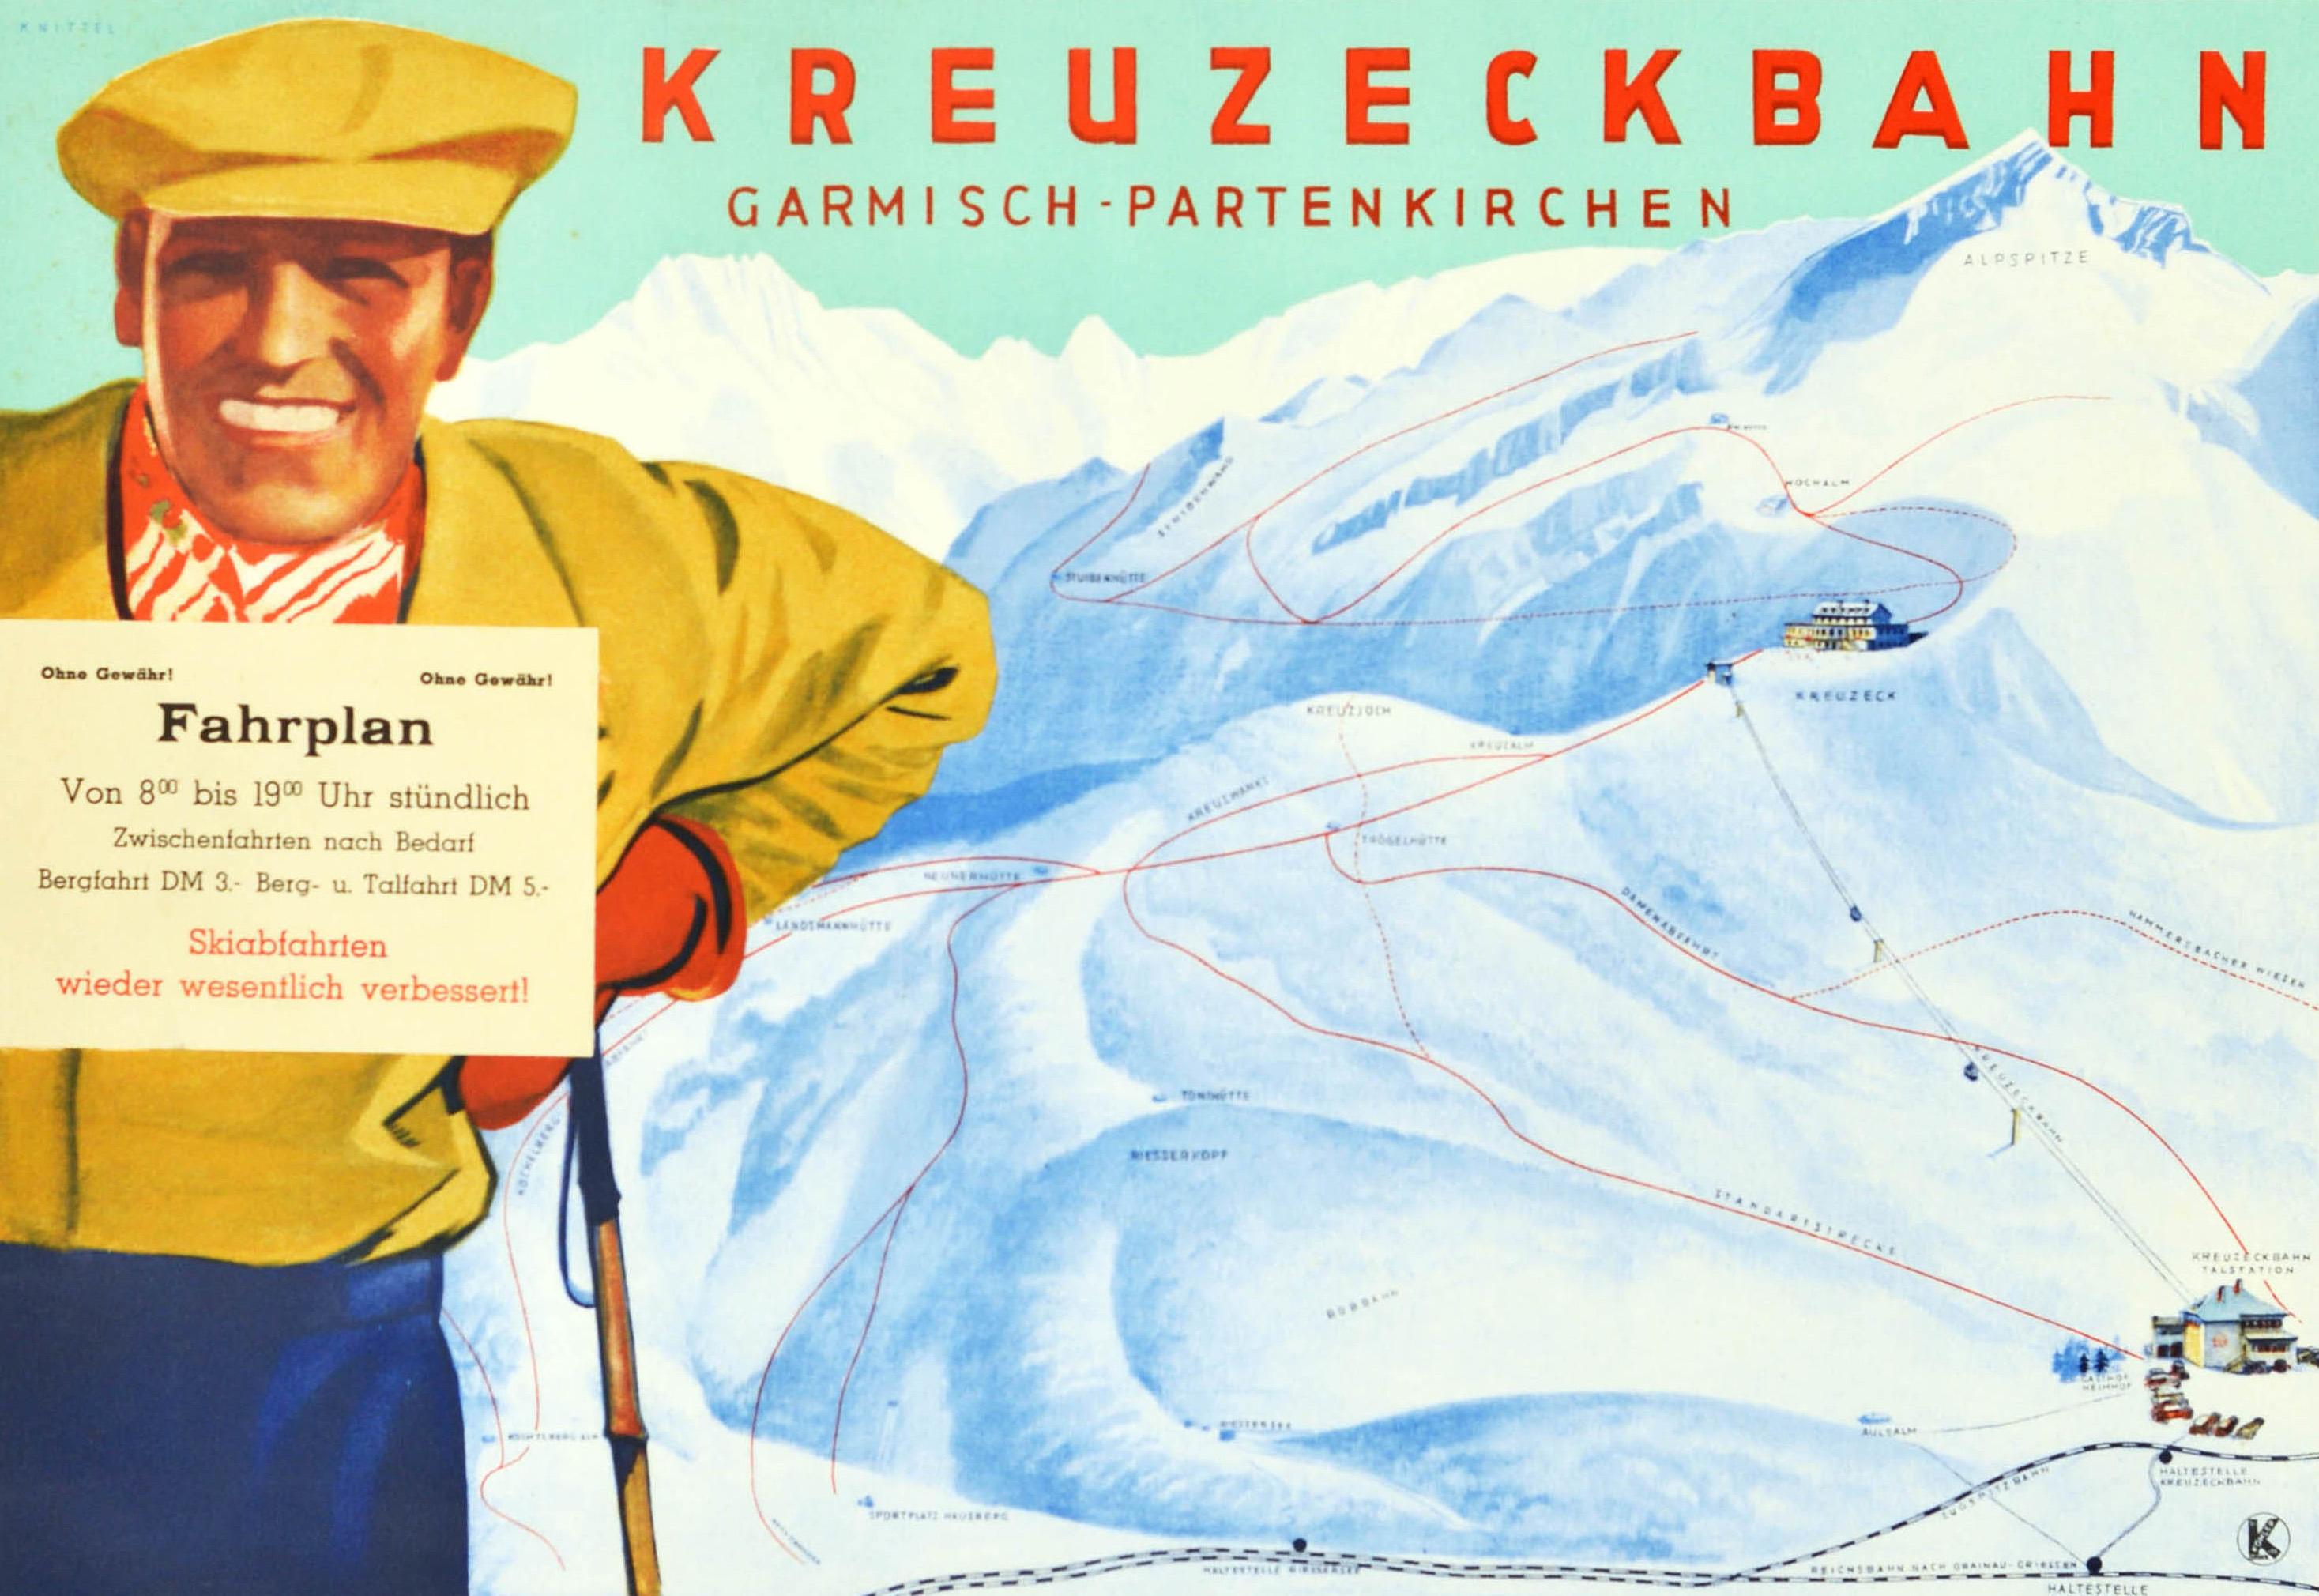 Original vintage poster promoting the Kreuzeckbahn Garmisch-Partenkirchen cable car service (opened 1926) in the alps mountain range of Bavaria Germany. Great design depicting a view of the ski resort area with the railway routes marked and a